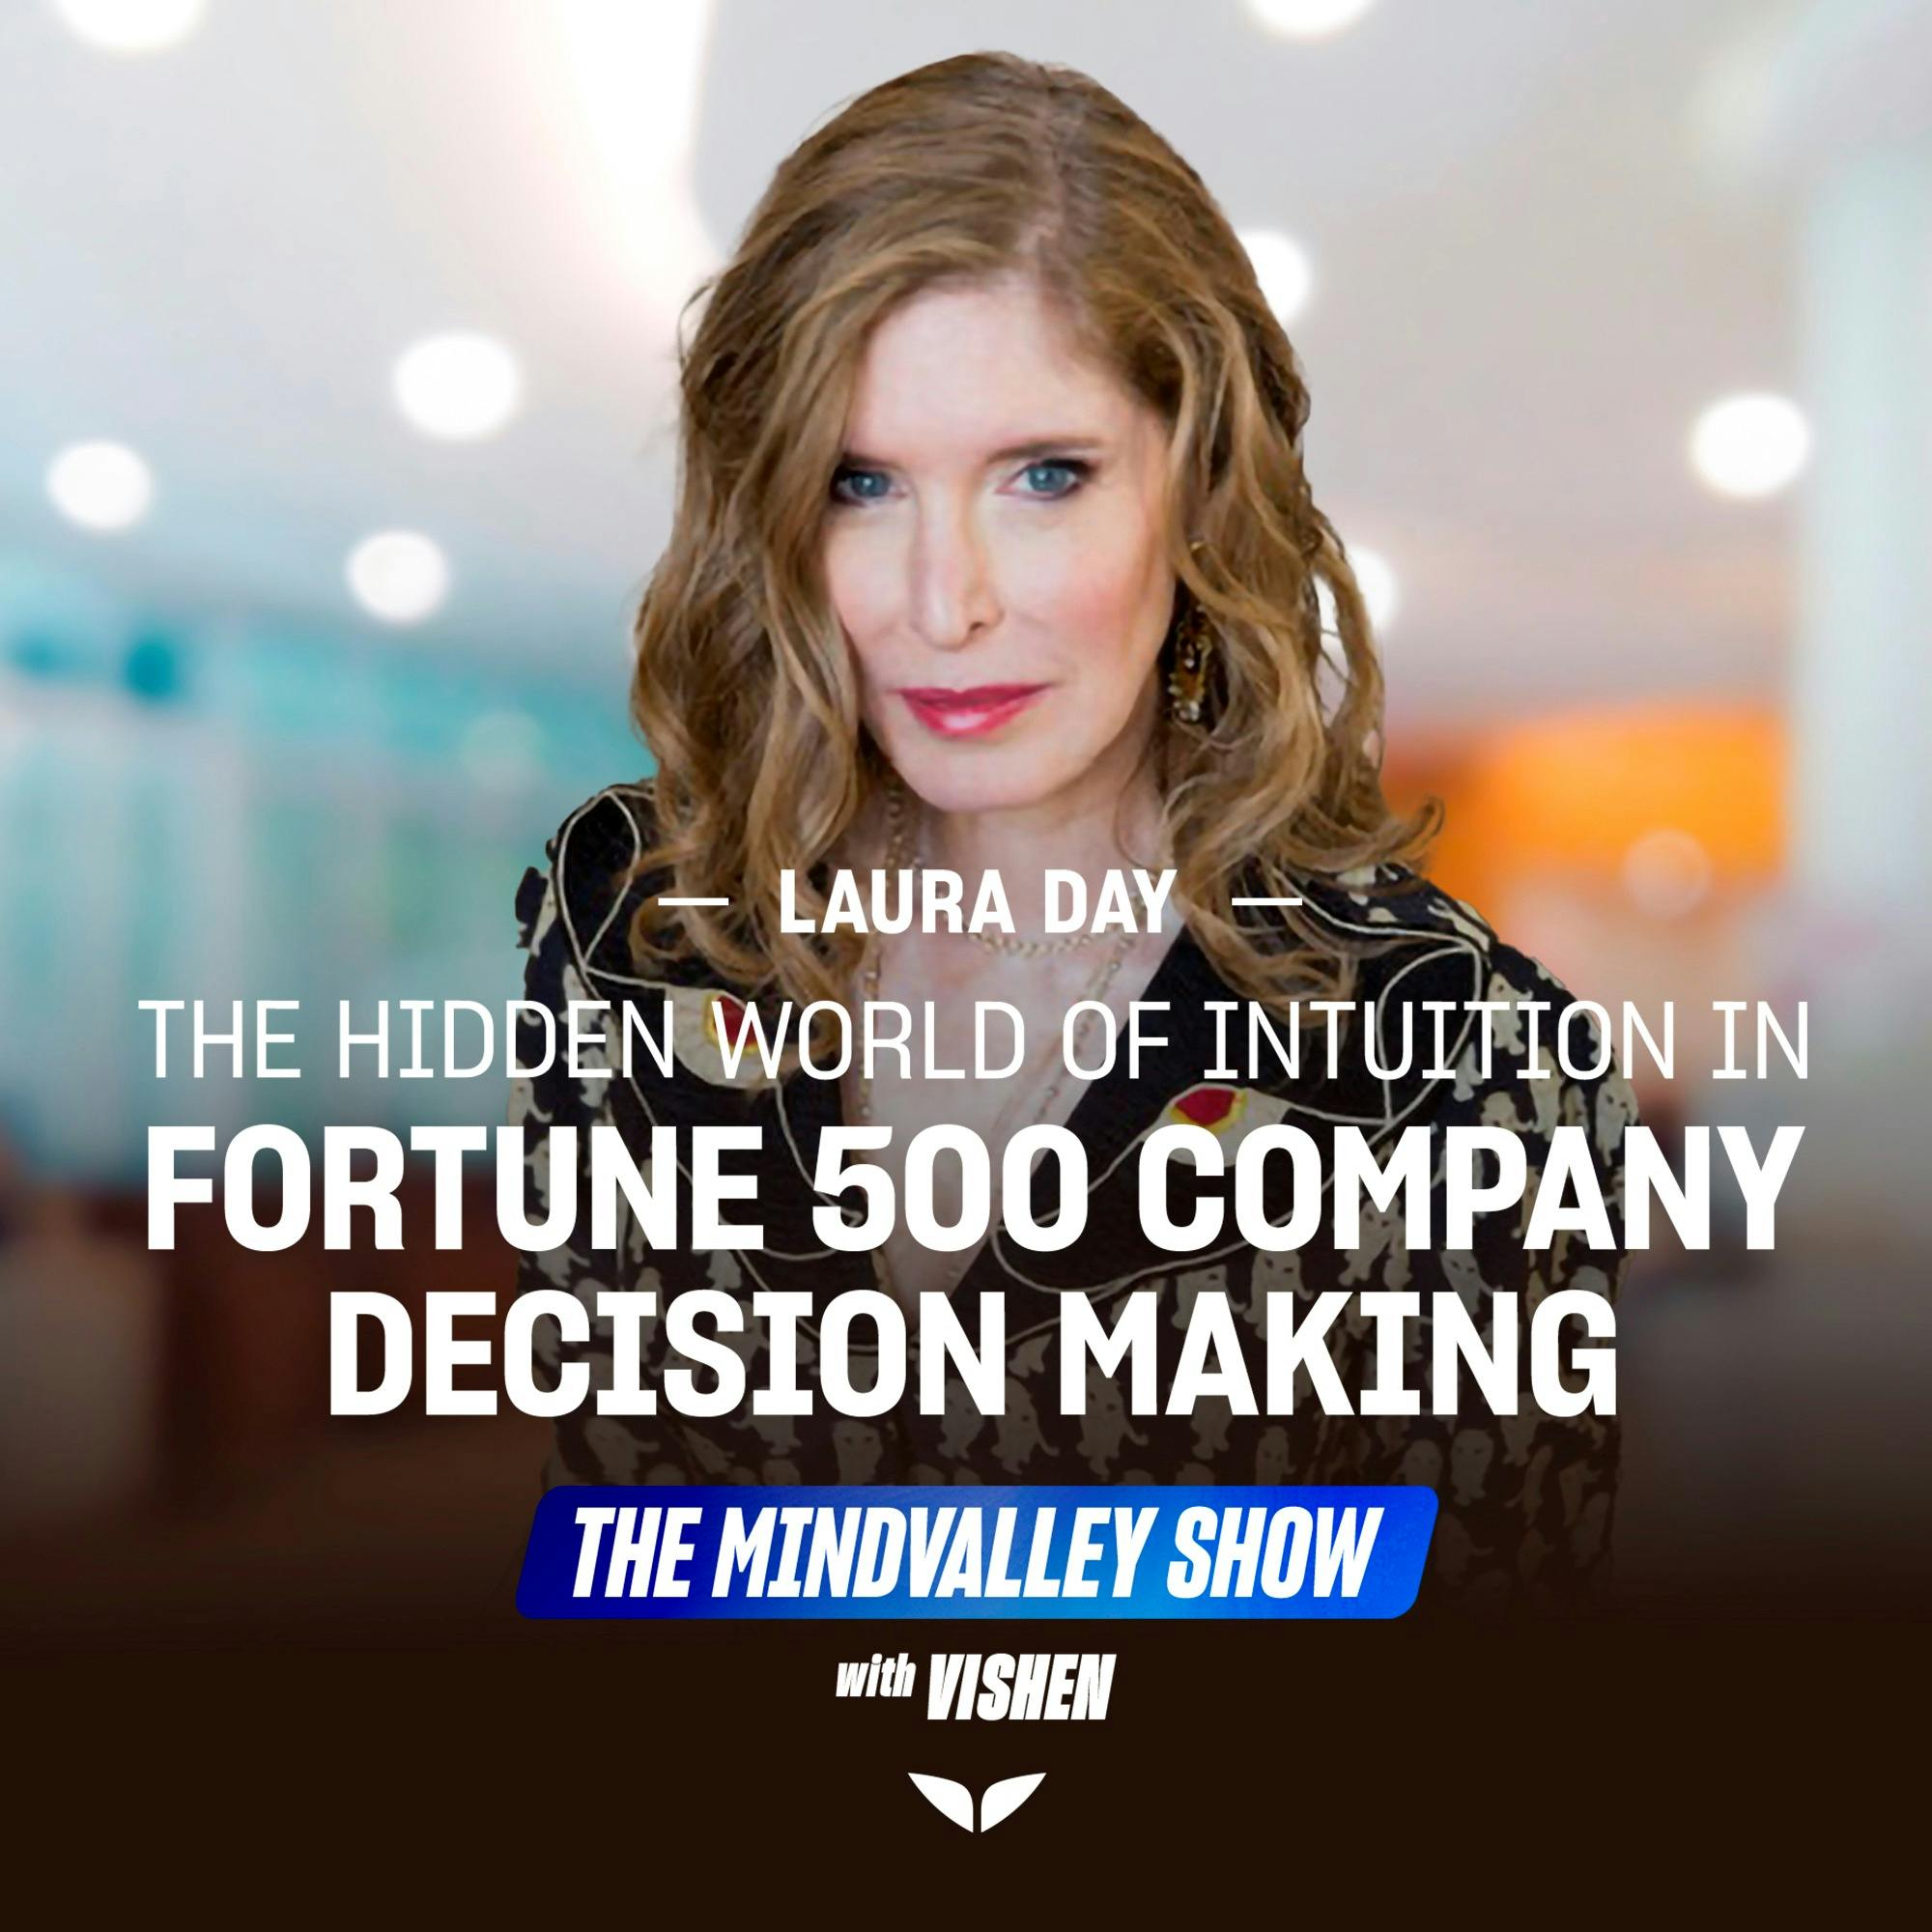 The Hidden World of Intuition in Fortune 500 Company Decision Making